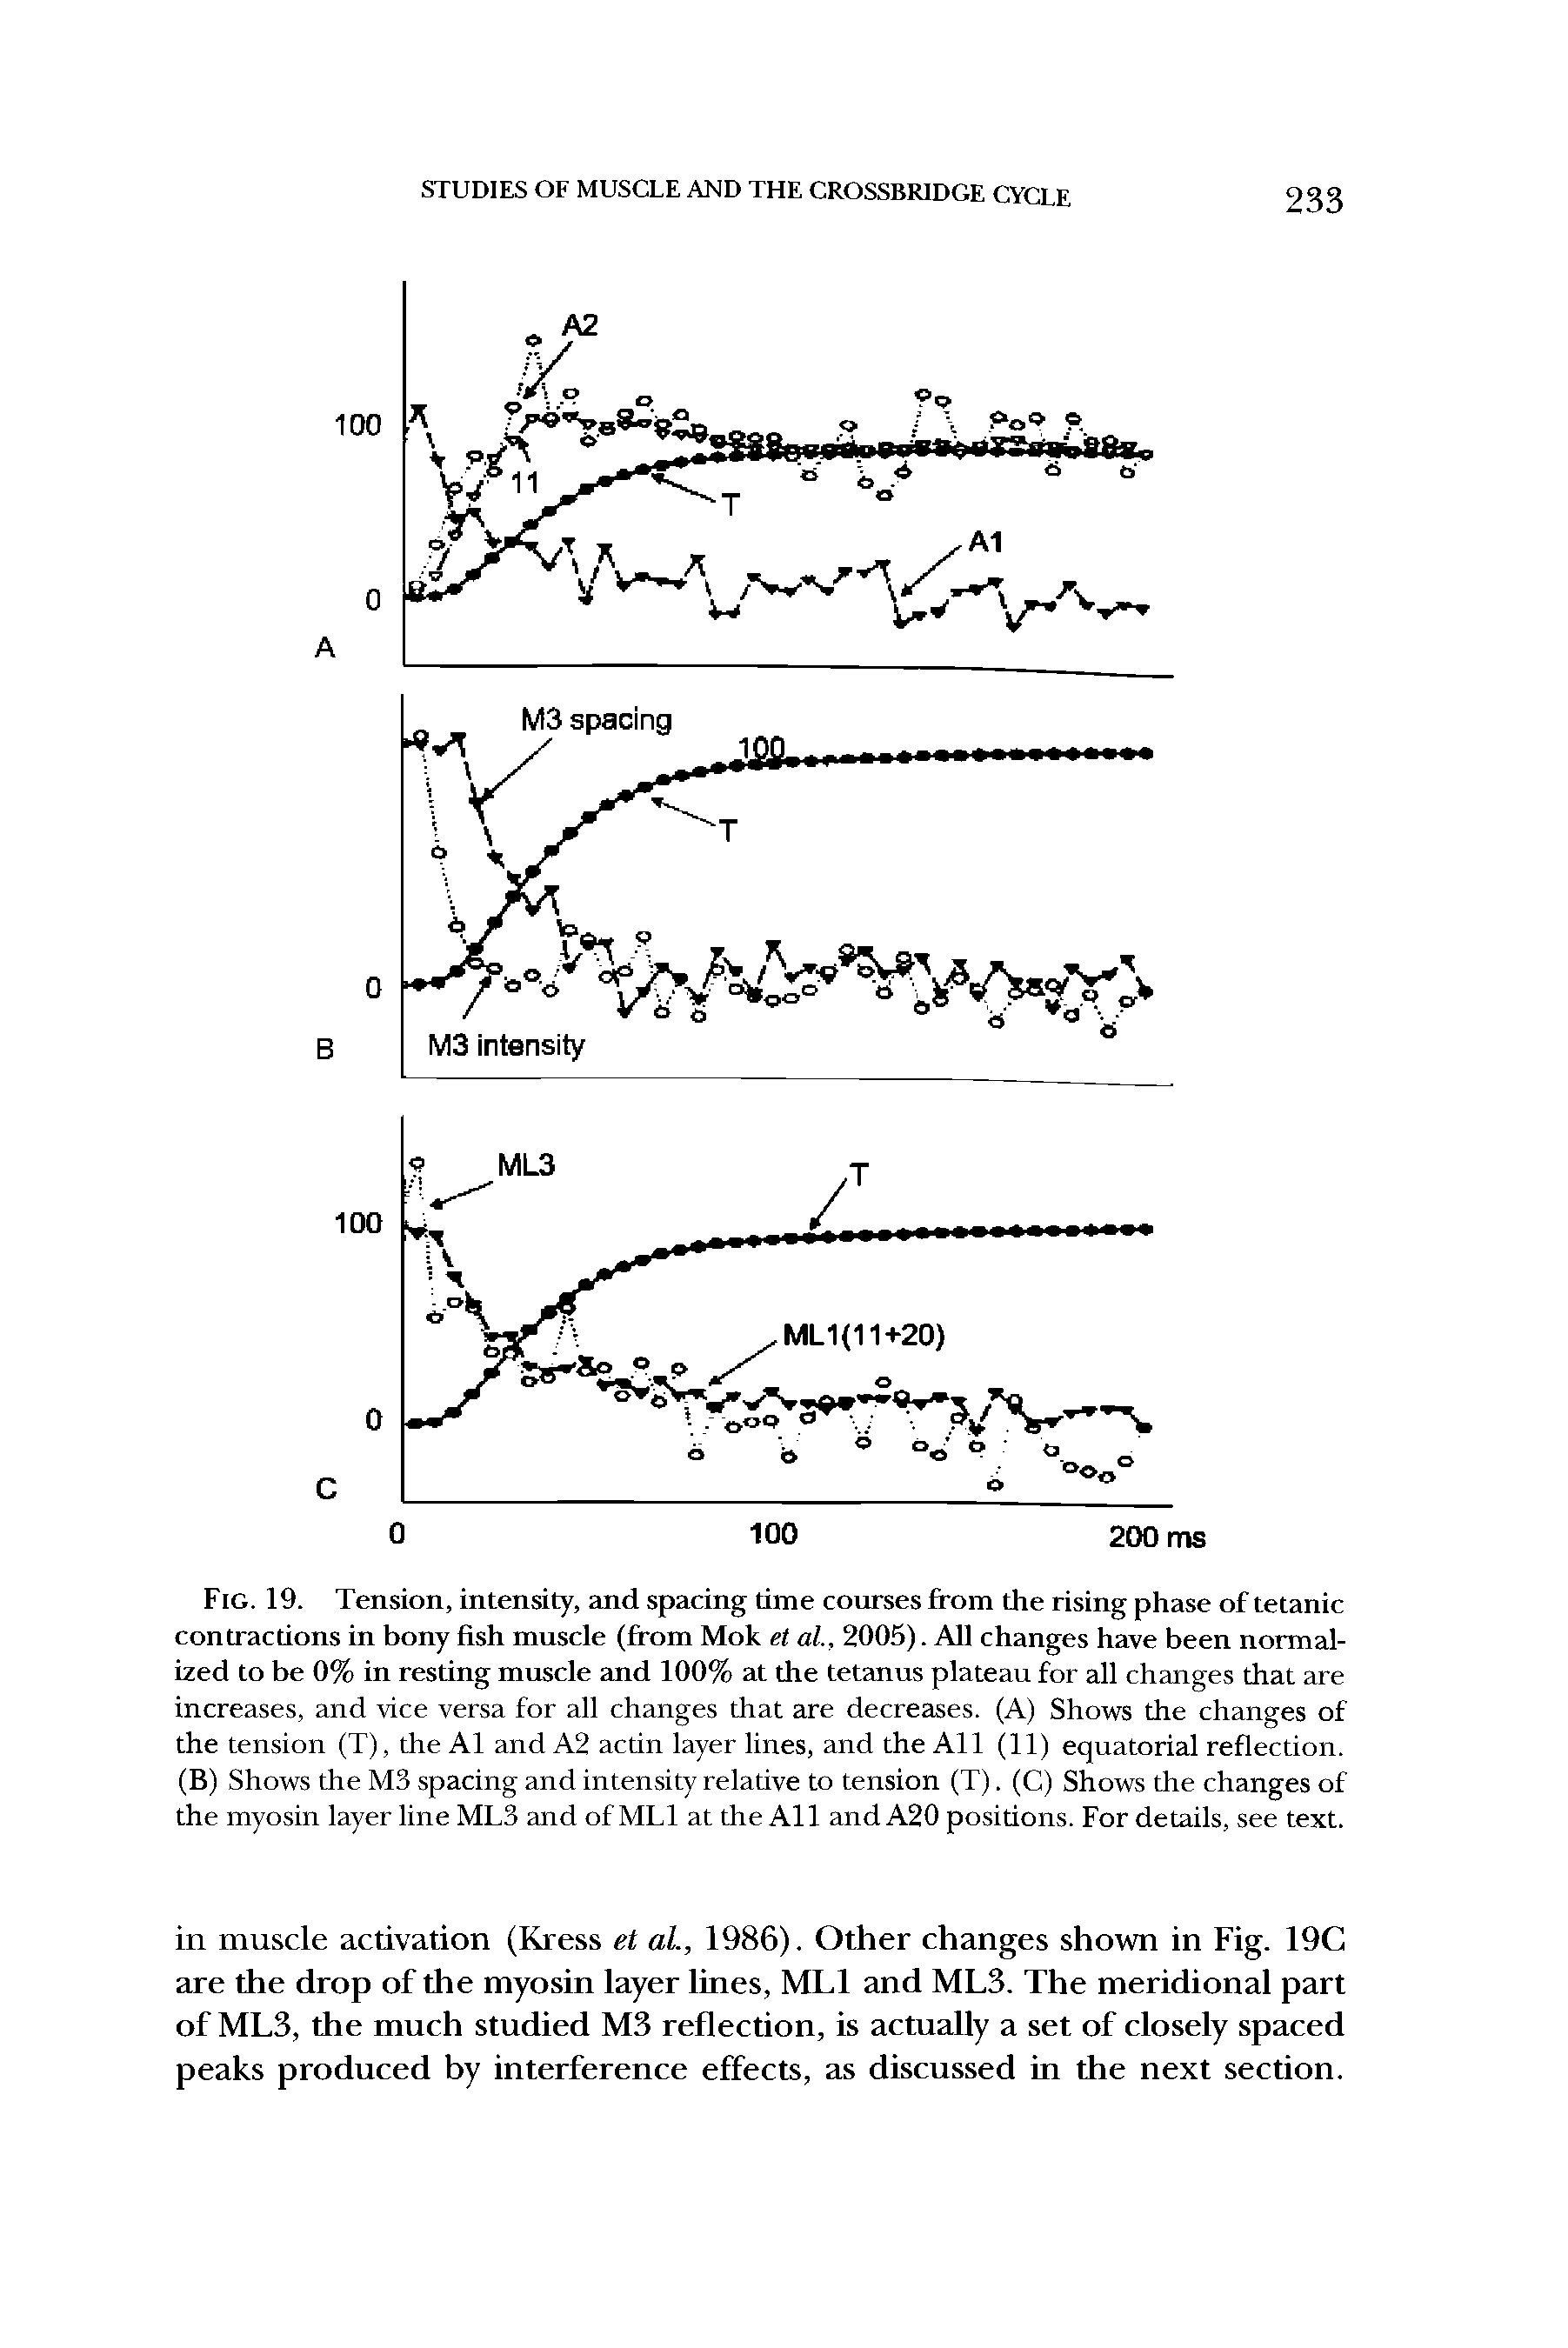 Fig. 19. Tension, intensity, and spacing time courses from the rising phase of tetanic contractions in bony fish muscle (from Mok et al., 2005). All changes have been normalized to be 0% in resting muscle and 100% at the tetanus plateau for all changes that are increases, and vice versa for all changes that are decreases. (A) Shows the changes of the tension (T), the Al and A2 actin layer lines, and the All (11) equatorial reflection. (B) Shows the M3 spacing and intensity relative to tension (T). (C) Shows the changes of the myosin layer line ML3 and of ML1 at the All and A20 positions. For details, see text.